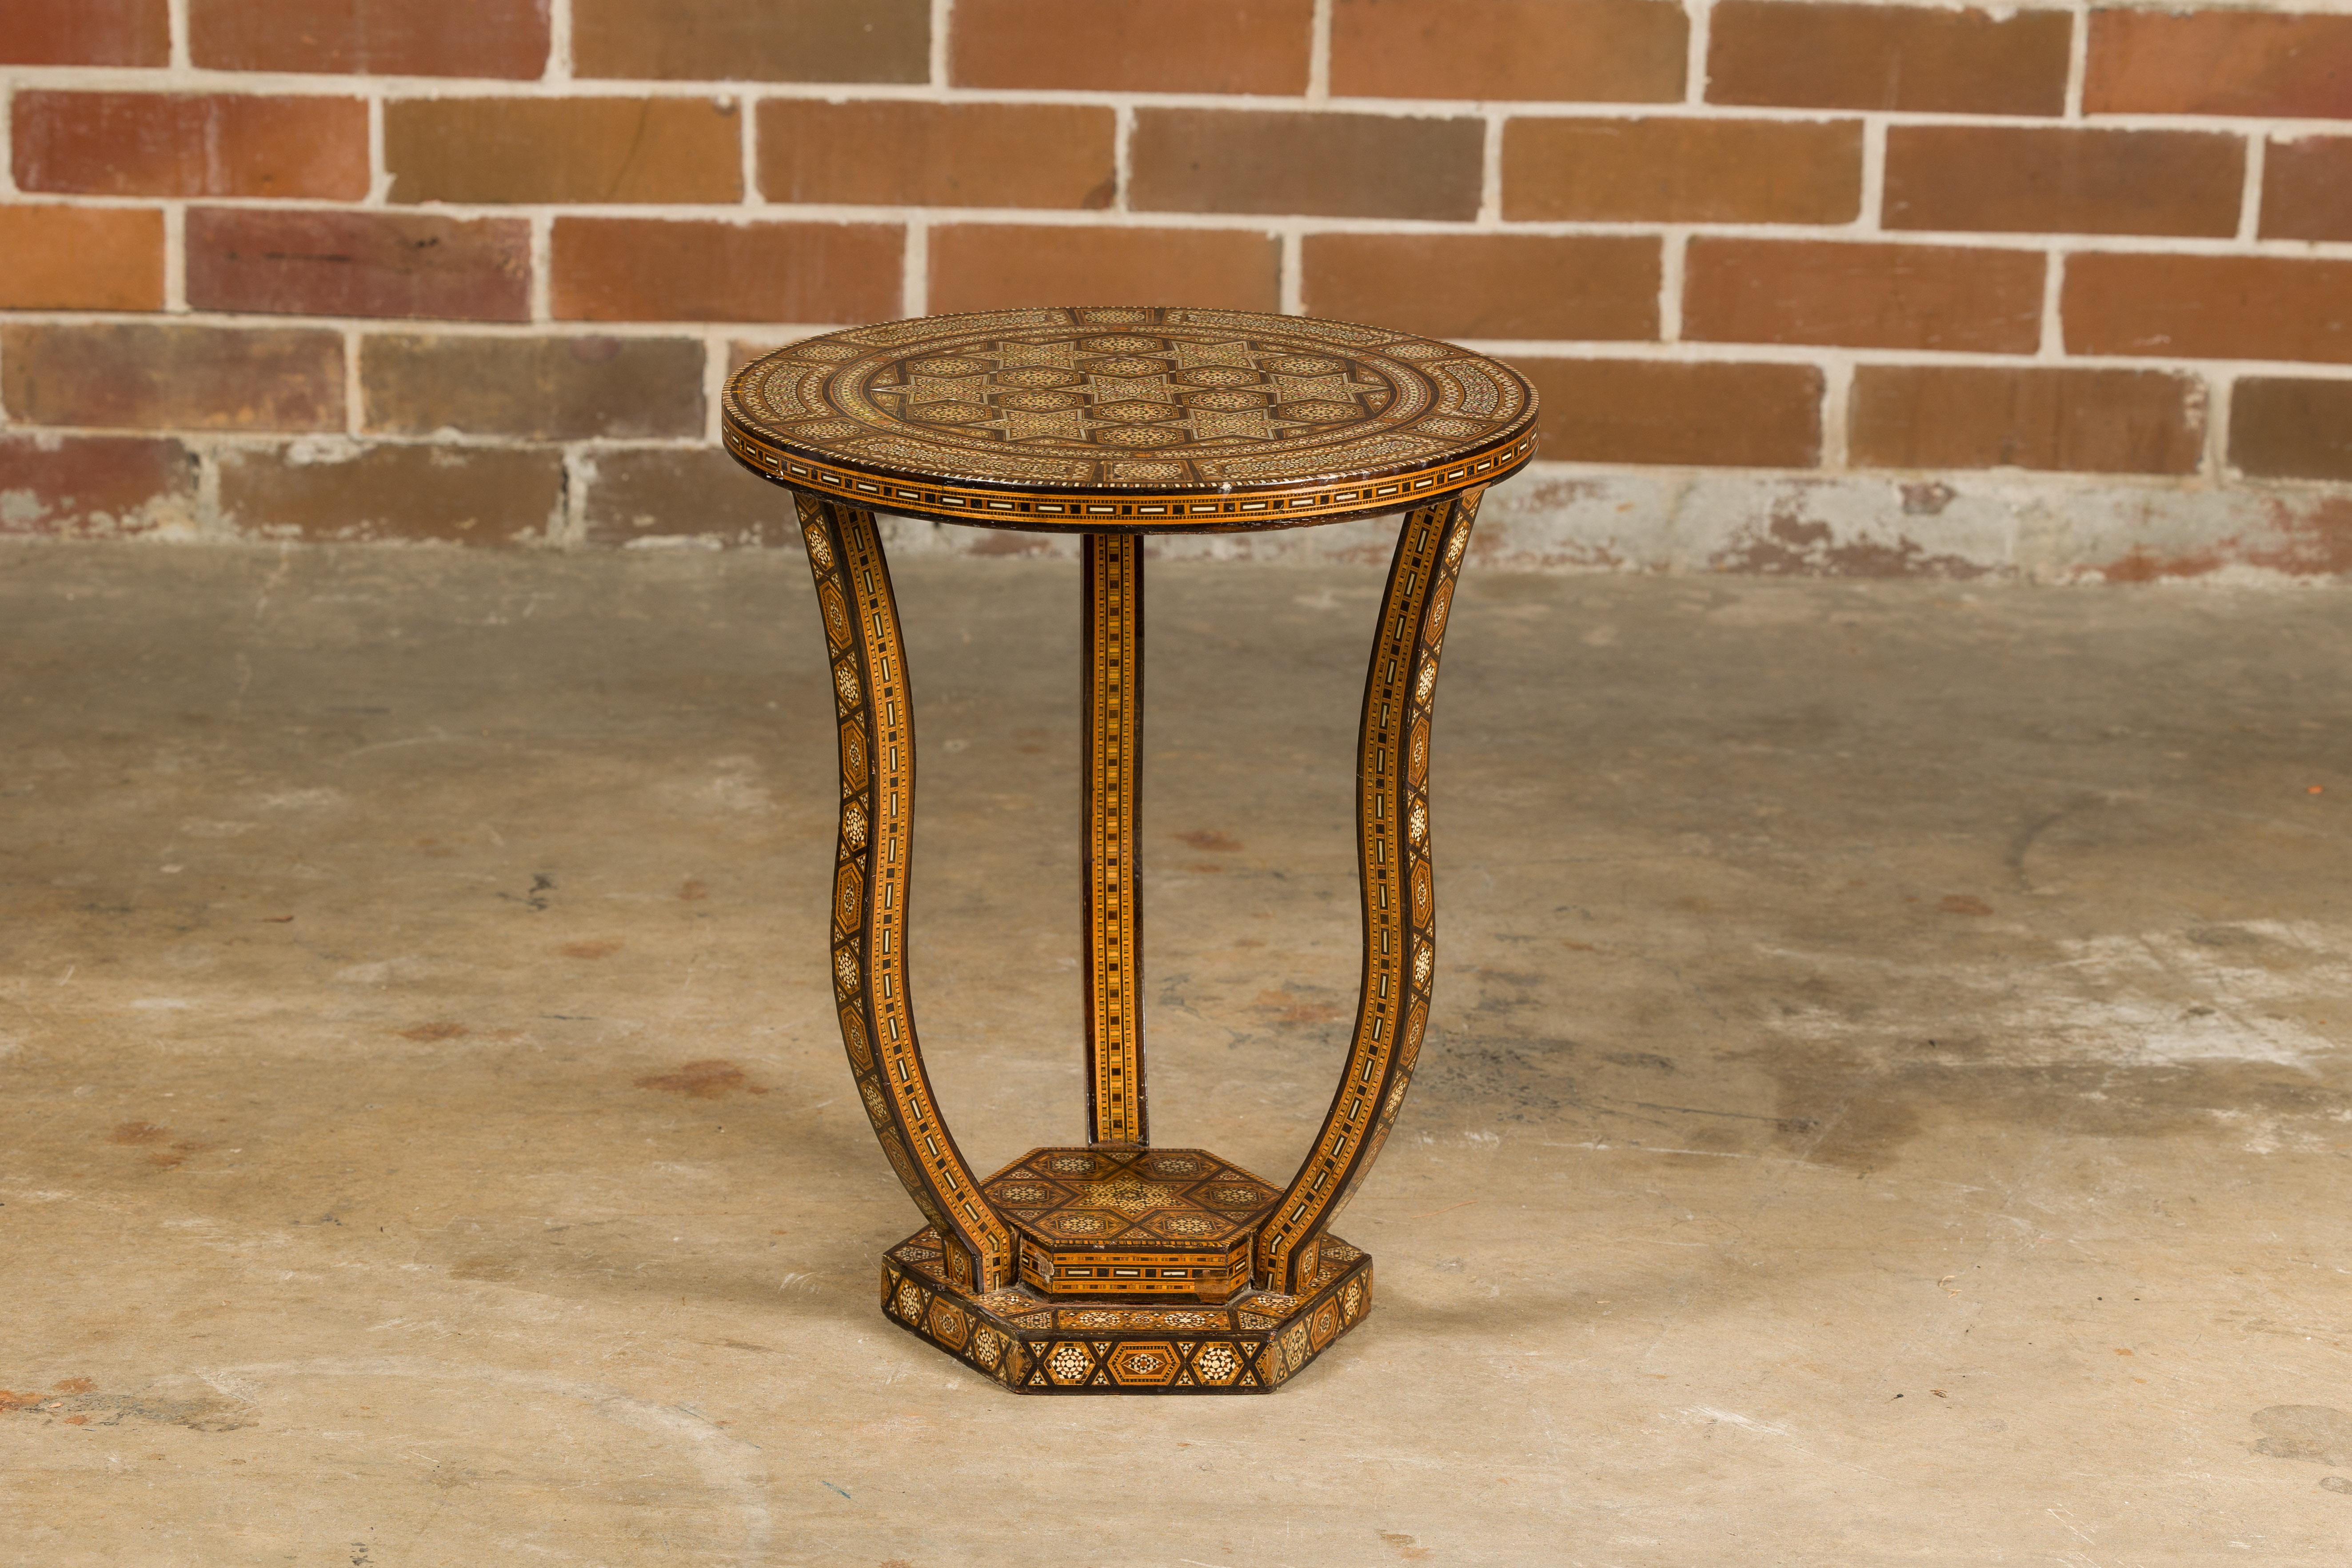 Moroccan 1900s Moorish Style Table with Geometric Bone Inlay and Curving Legs For Sale 1